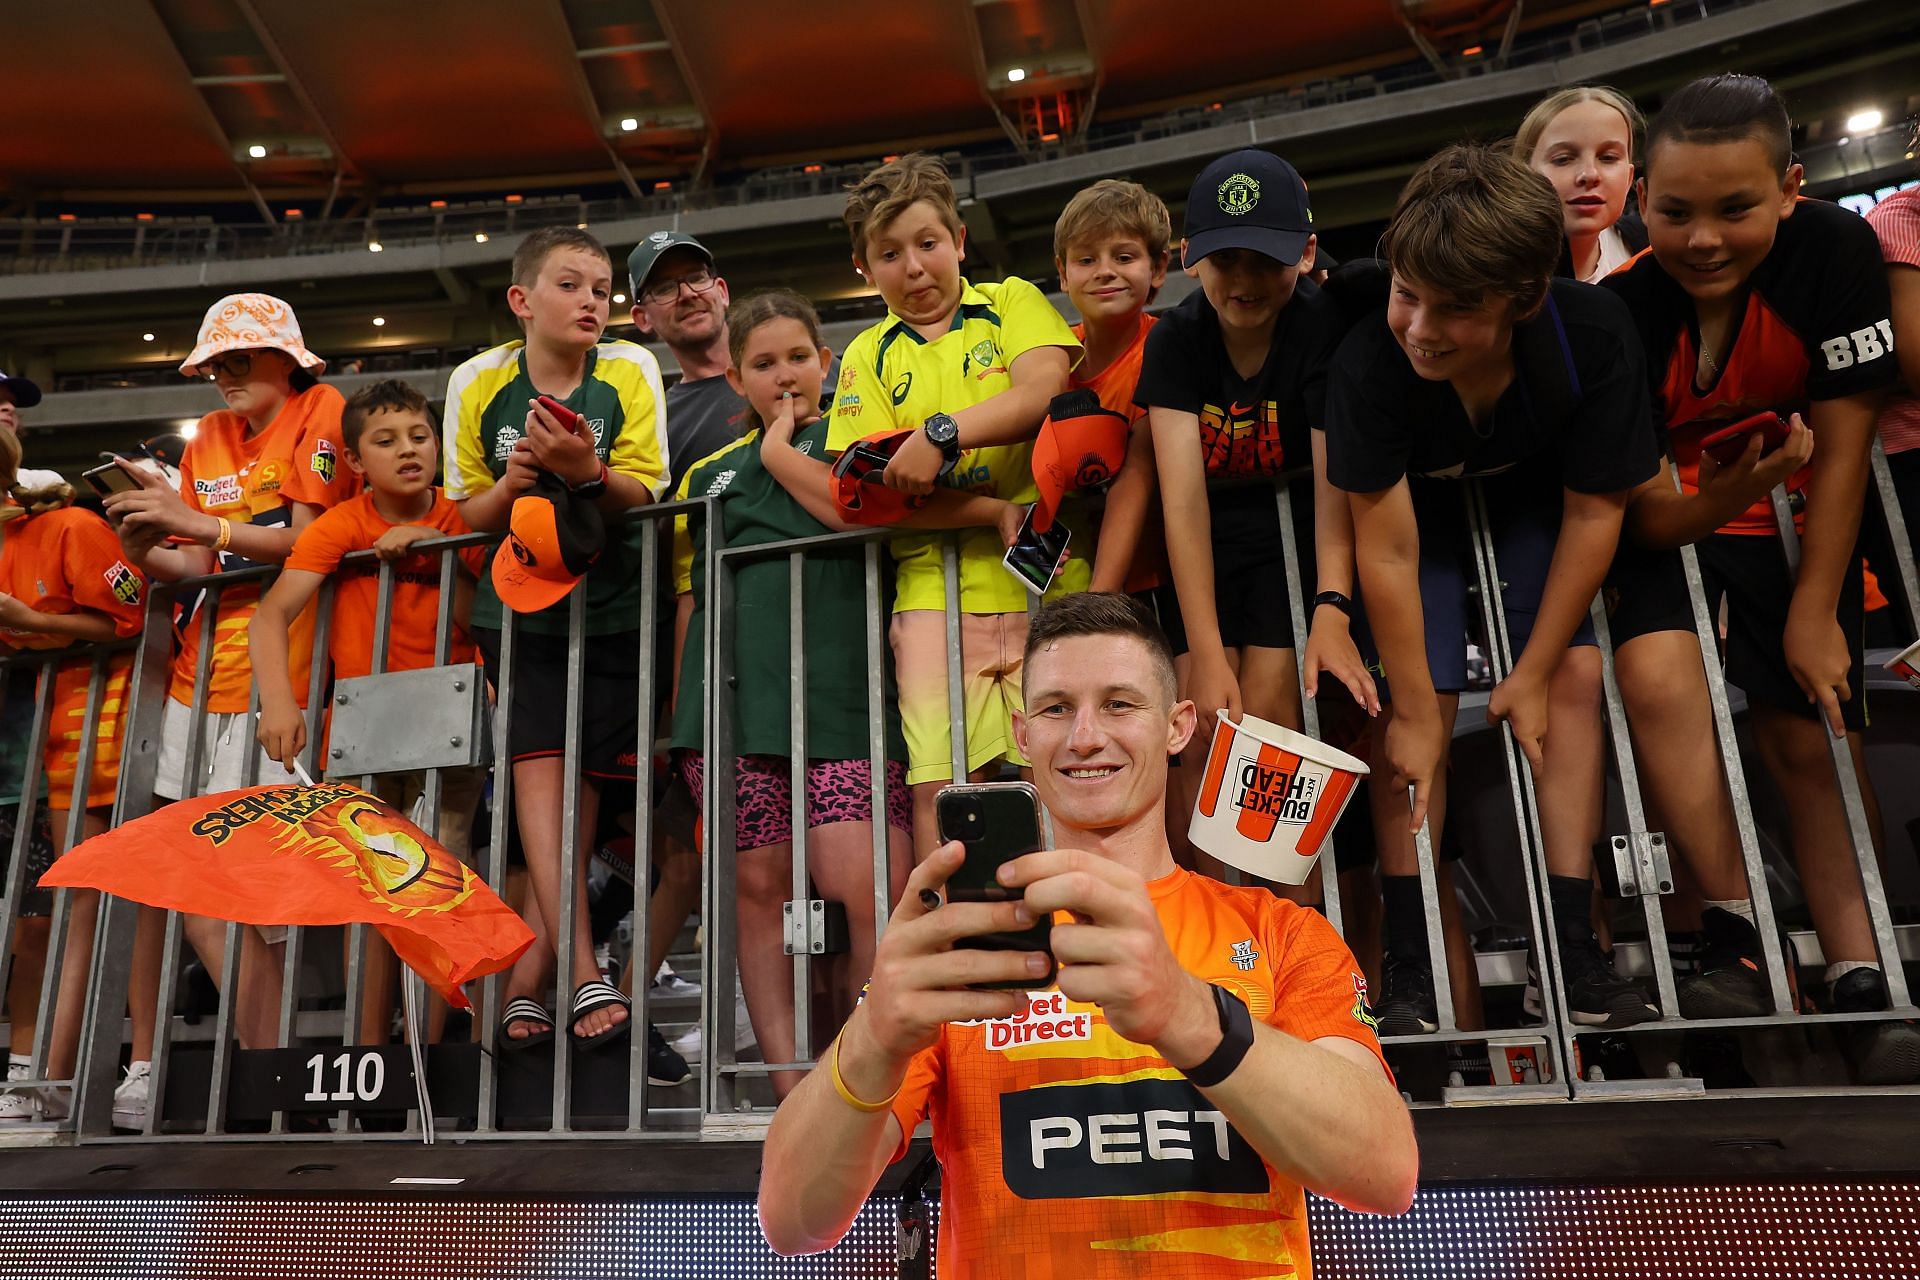 BBL - The Qualifier: Perth Scorchers v Sydney Sixers (Image: Getty)